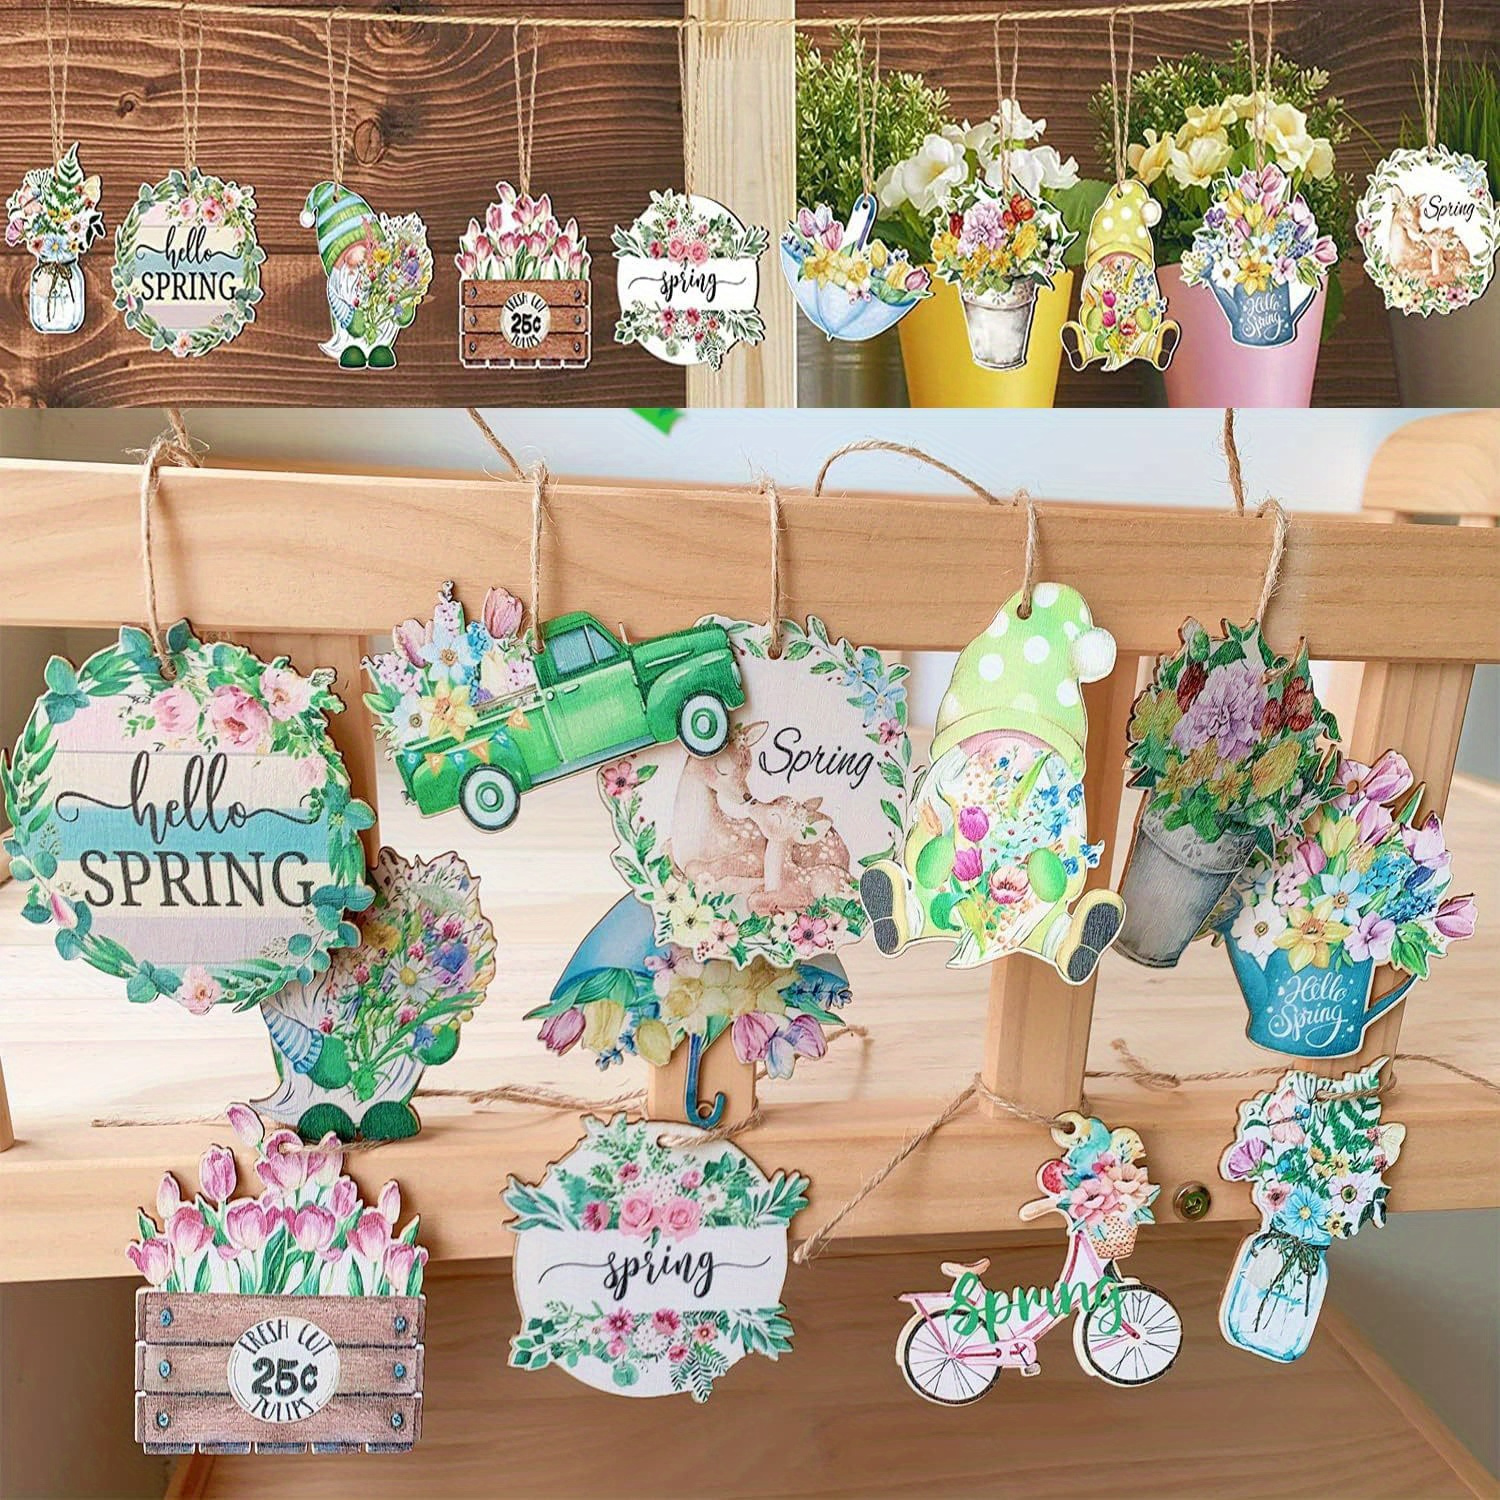 24pcs spring flowers wooden hanging ornaments party decor holiday supplies tree decorations yard decoration holiday arrangement garden decor